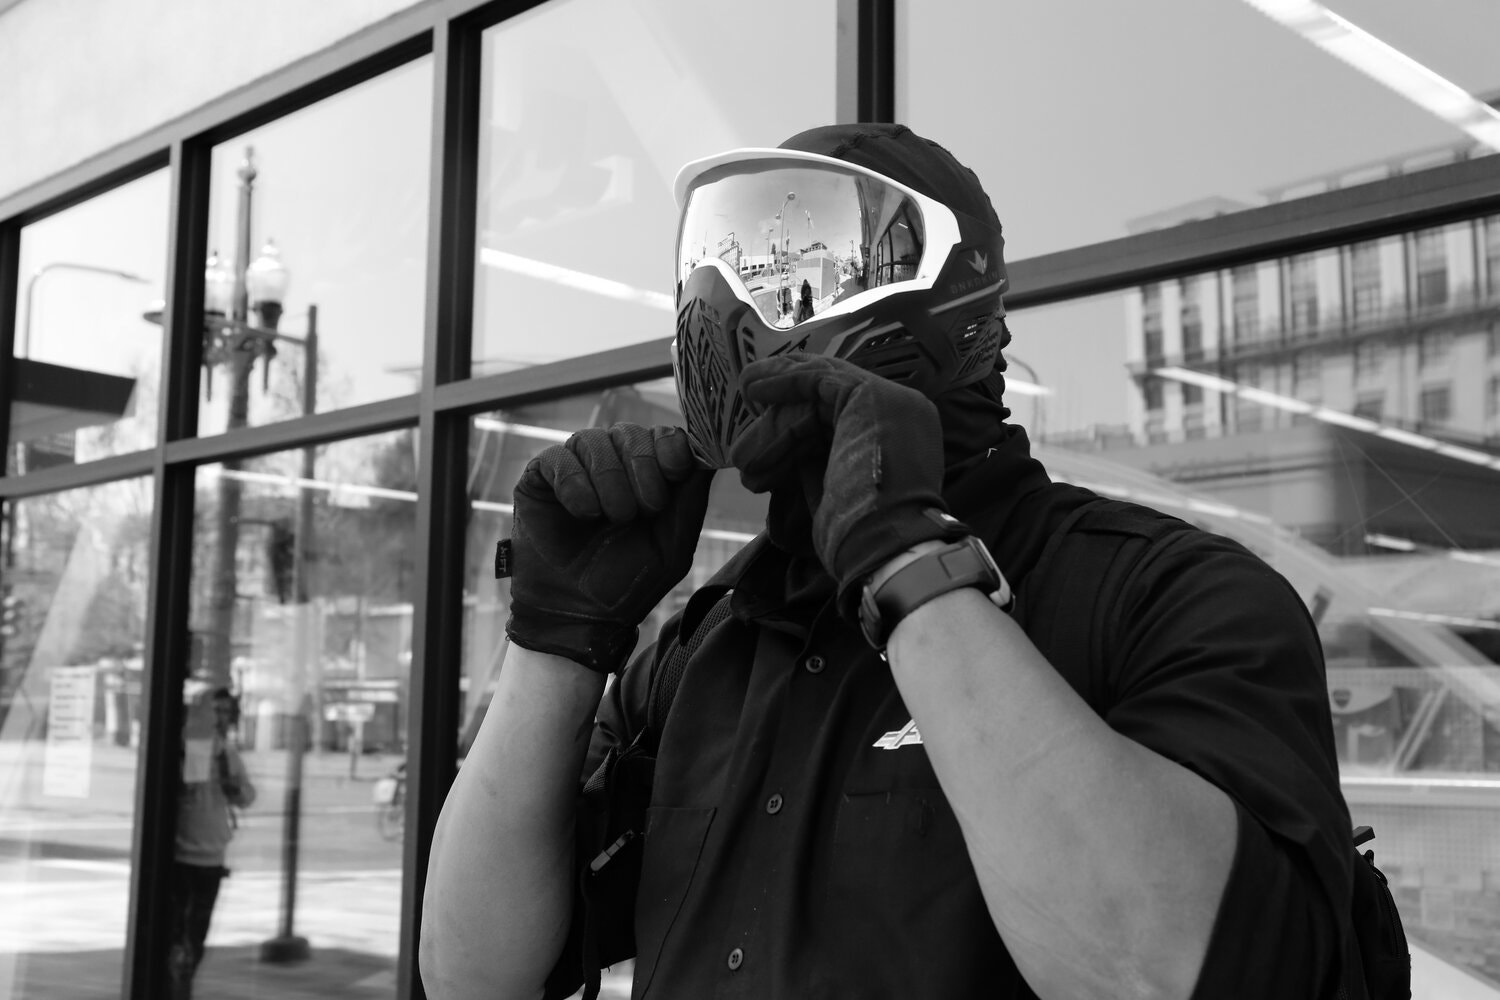 A person wearing a mask, goggles, and gloves adjusts their face covering outdoors. Their reflection and surrounding buildings are visible in the mirrored goggles. Standing near a glass building with street lamps and other urban elements in the background, they evoke a scene straight out of Berkeley Journalism.